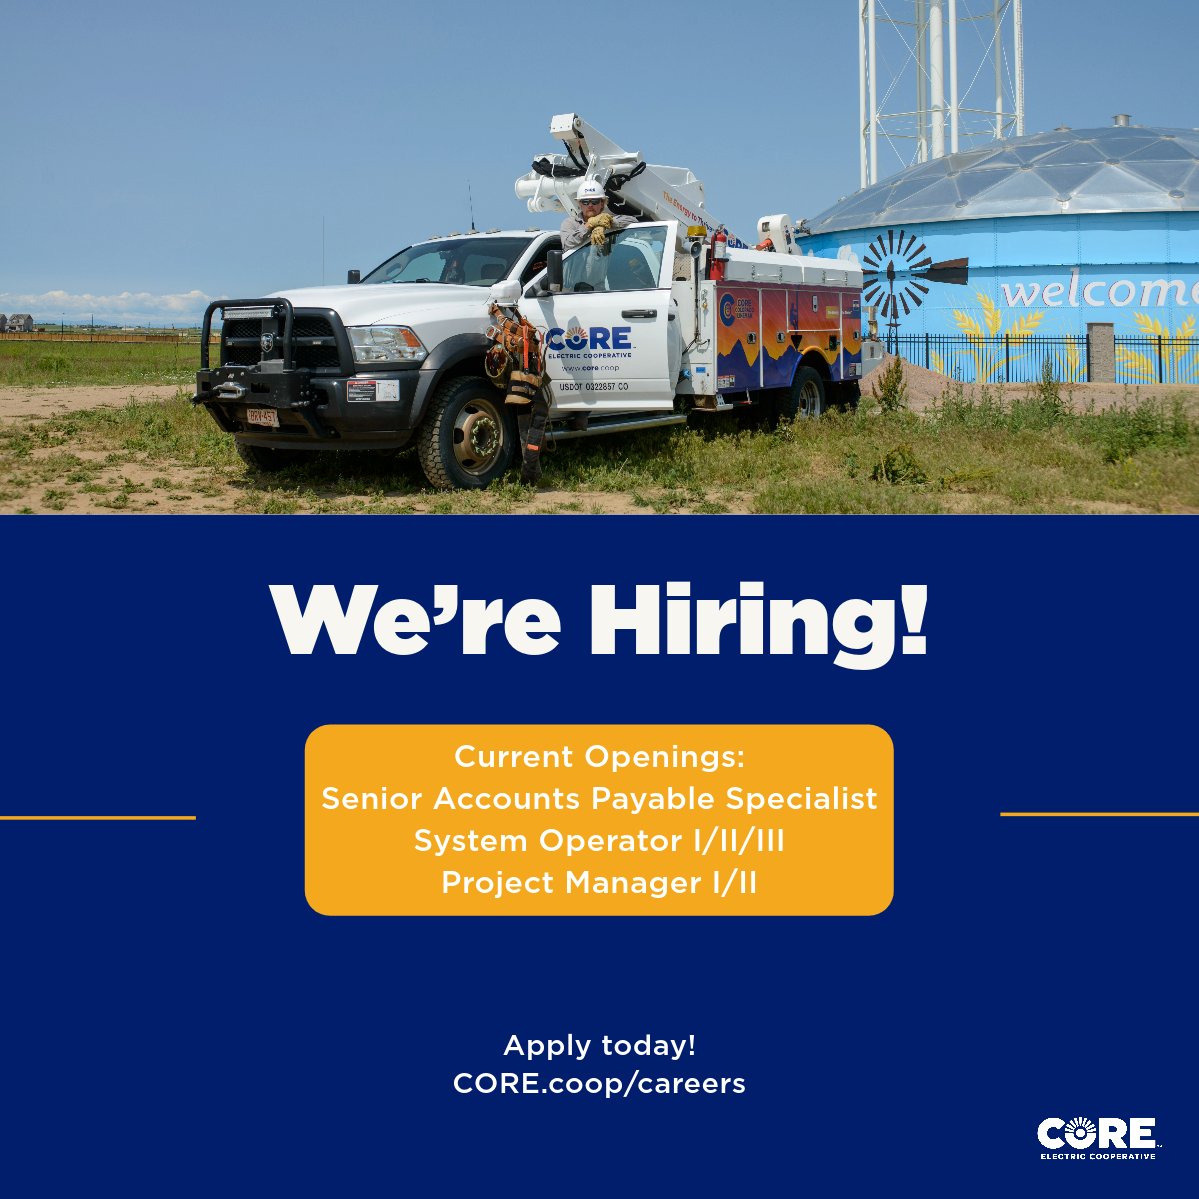 CORE is hiring! Take a look at our open positions and apply today ⚡ core.coop/careers/curren… #JobOpening #CORECareers #Utilities